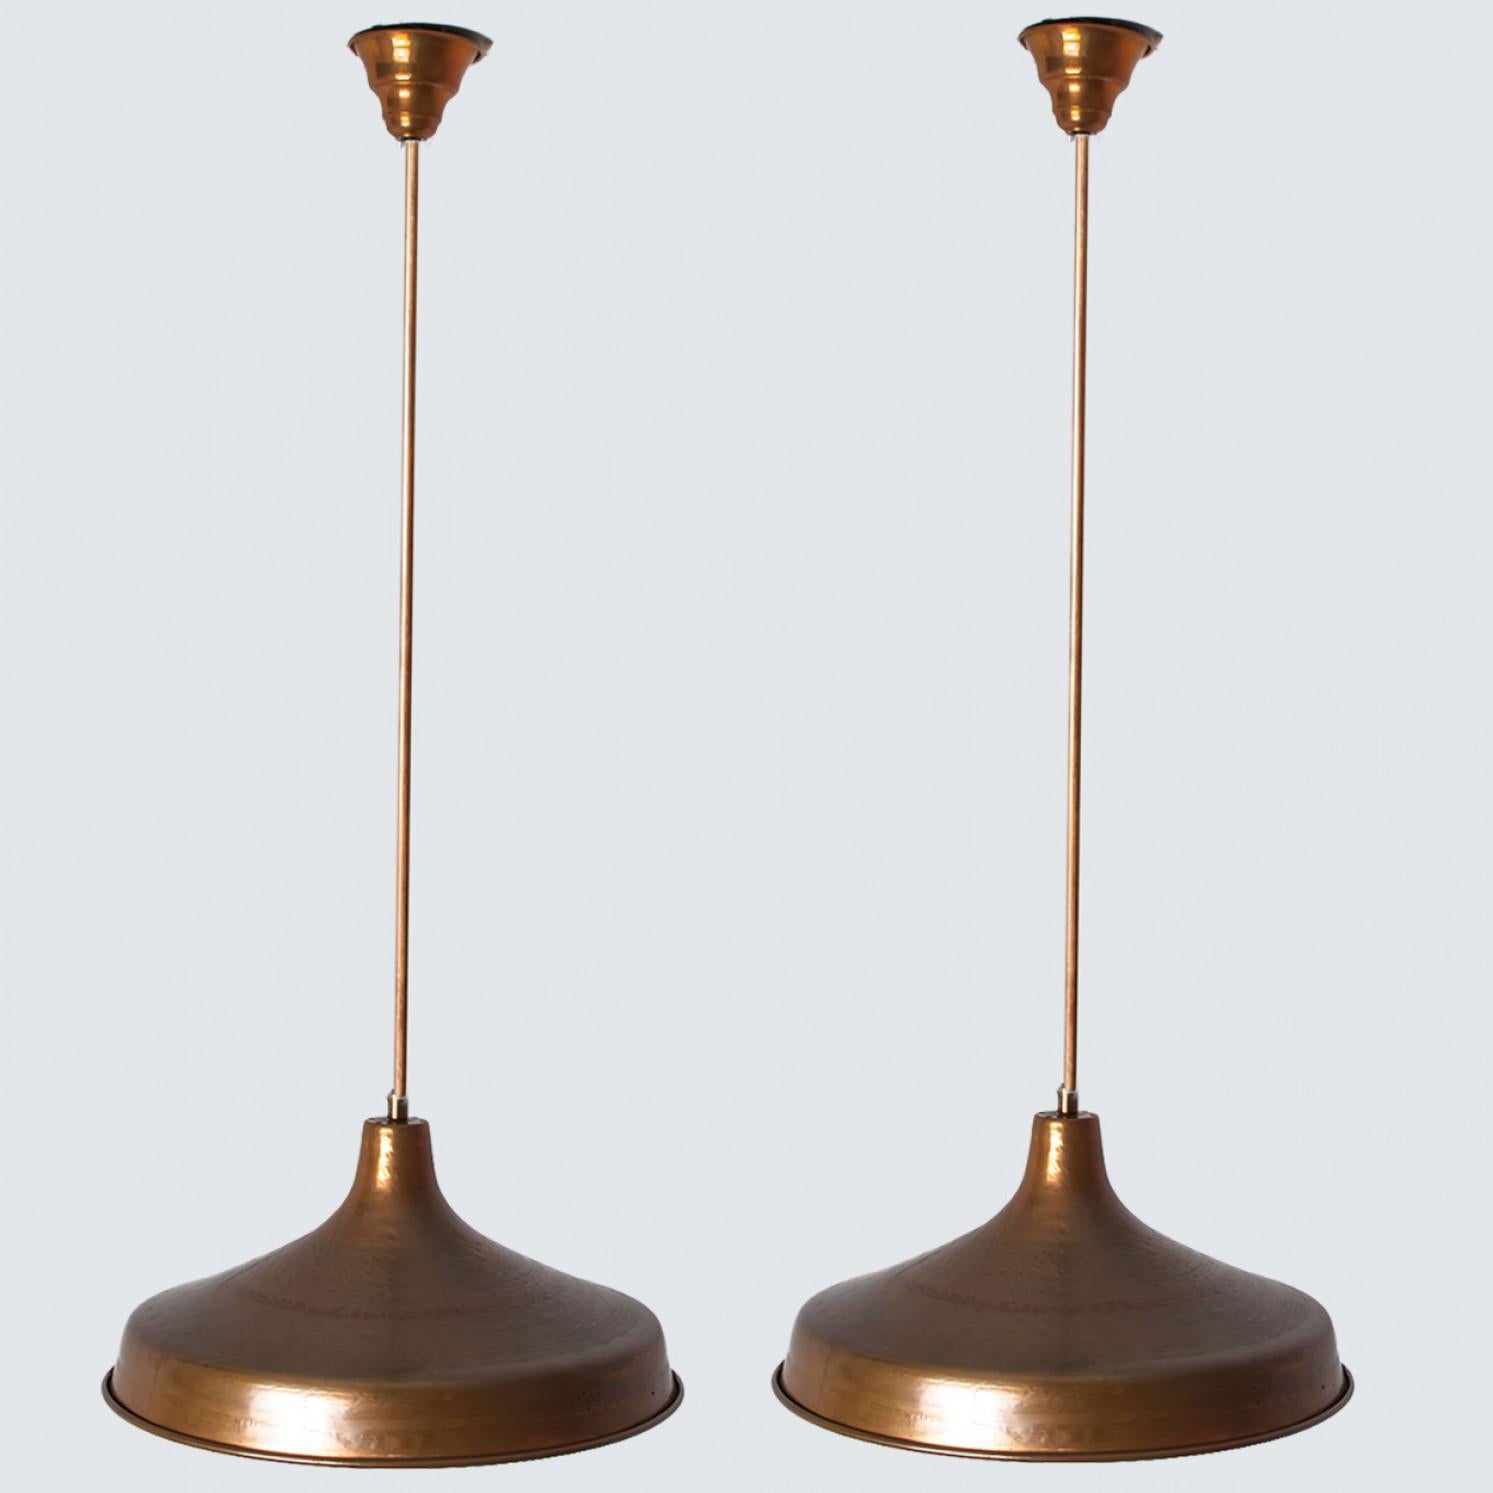 1 of 2 Large Danish Copper Hanging Lamps, 1960 For Sale 4